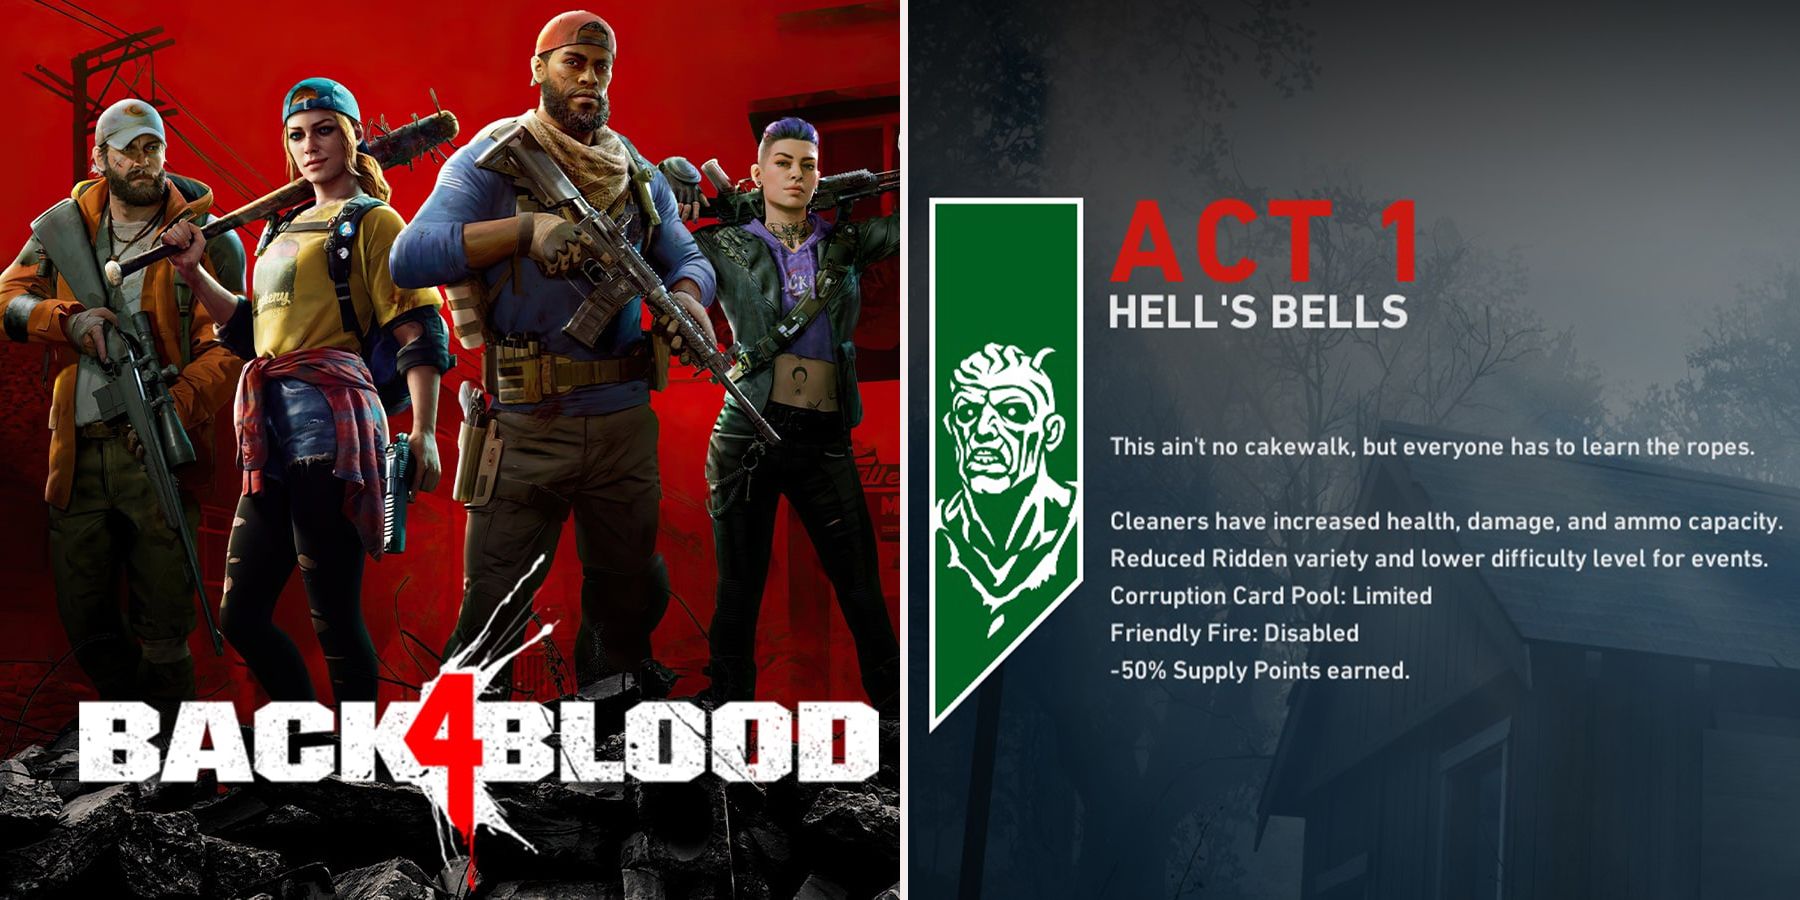 Back 4 Blood has more than 10 million players and new content is